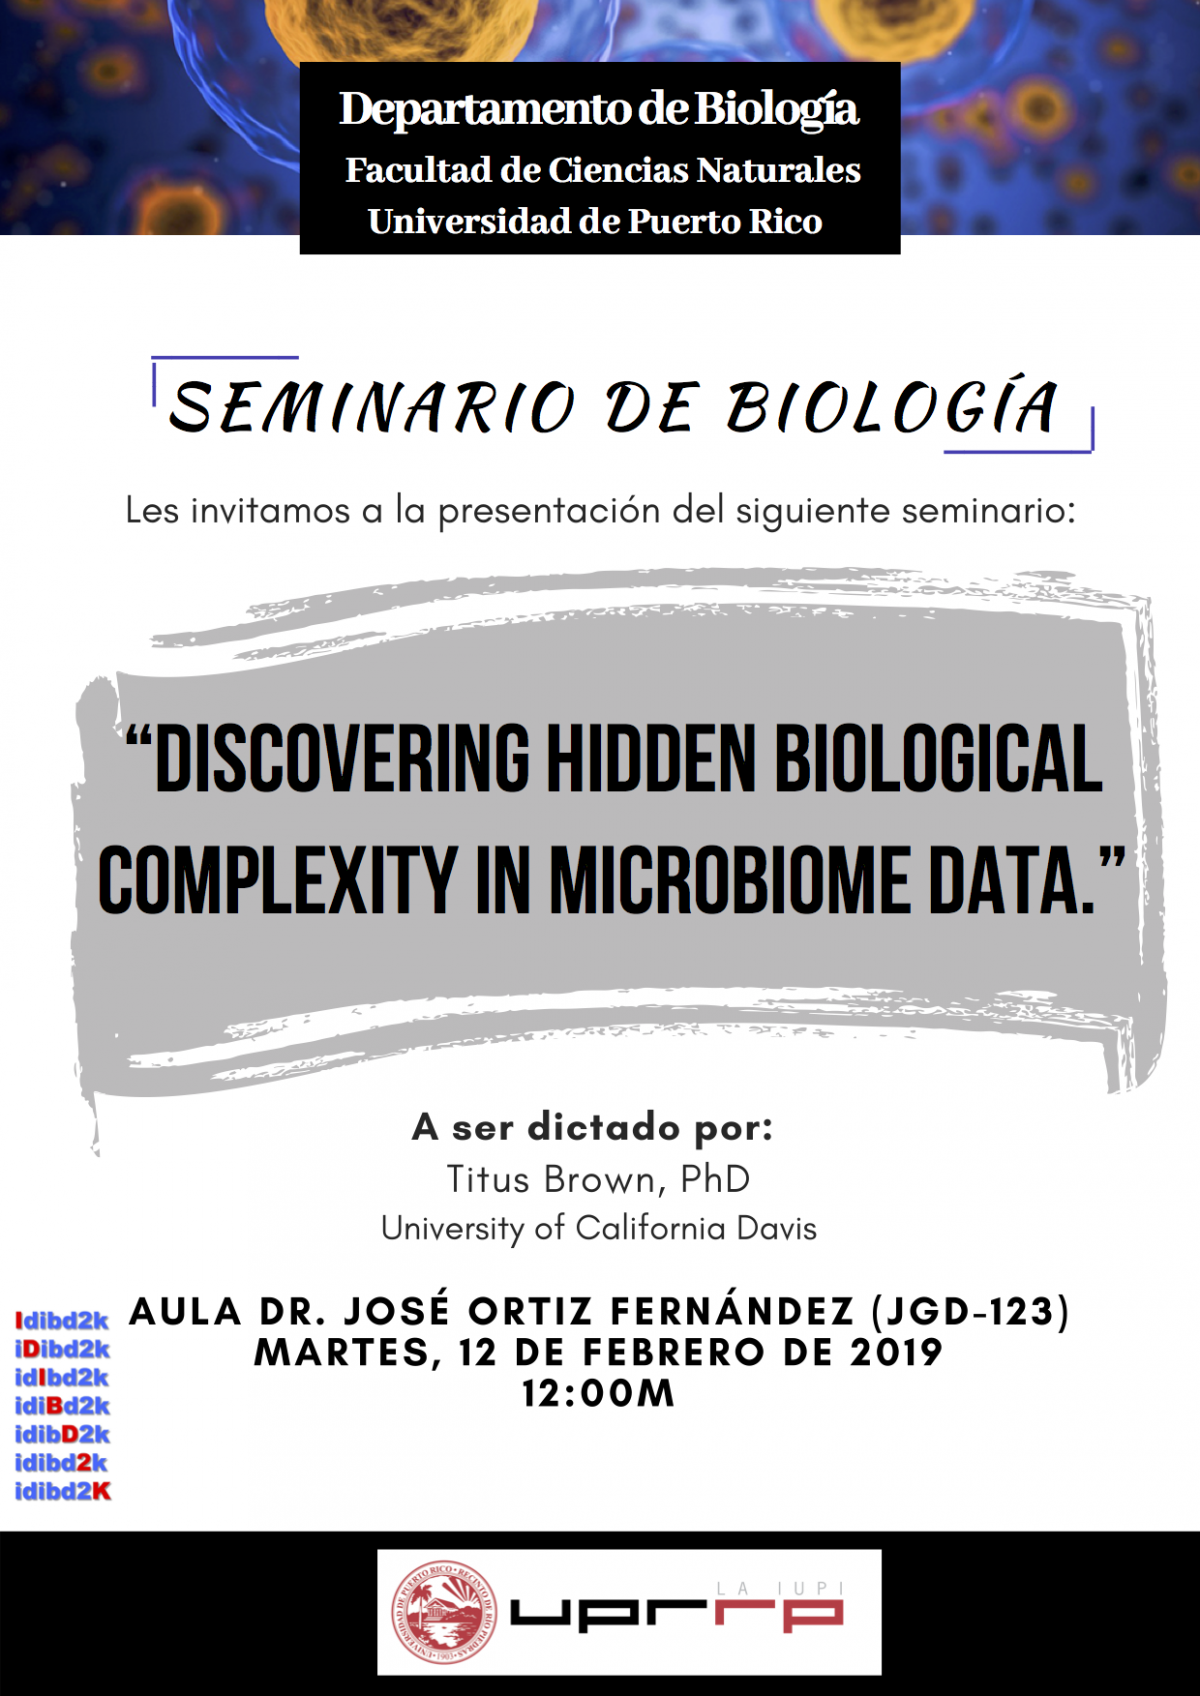 Seminar: Discovering hidden biological complexity in microbiome data